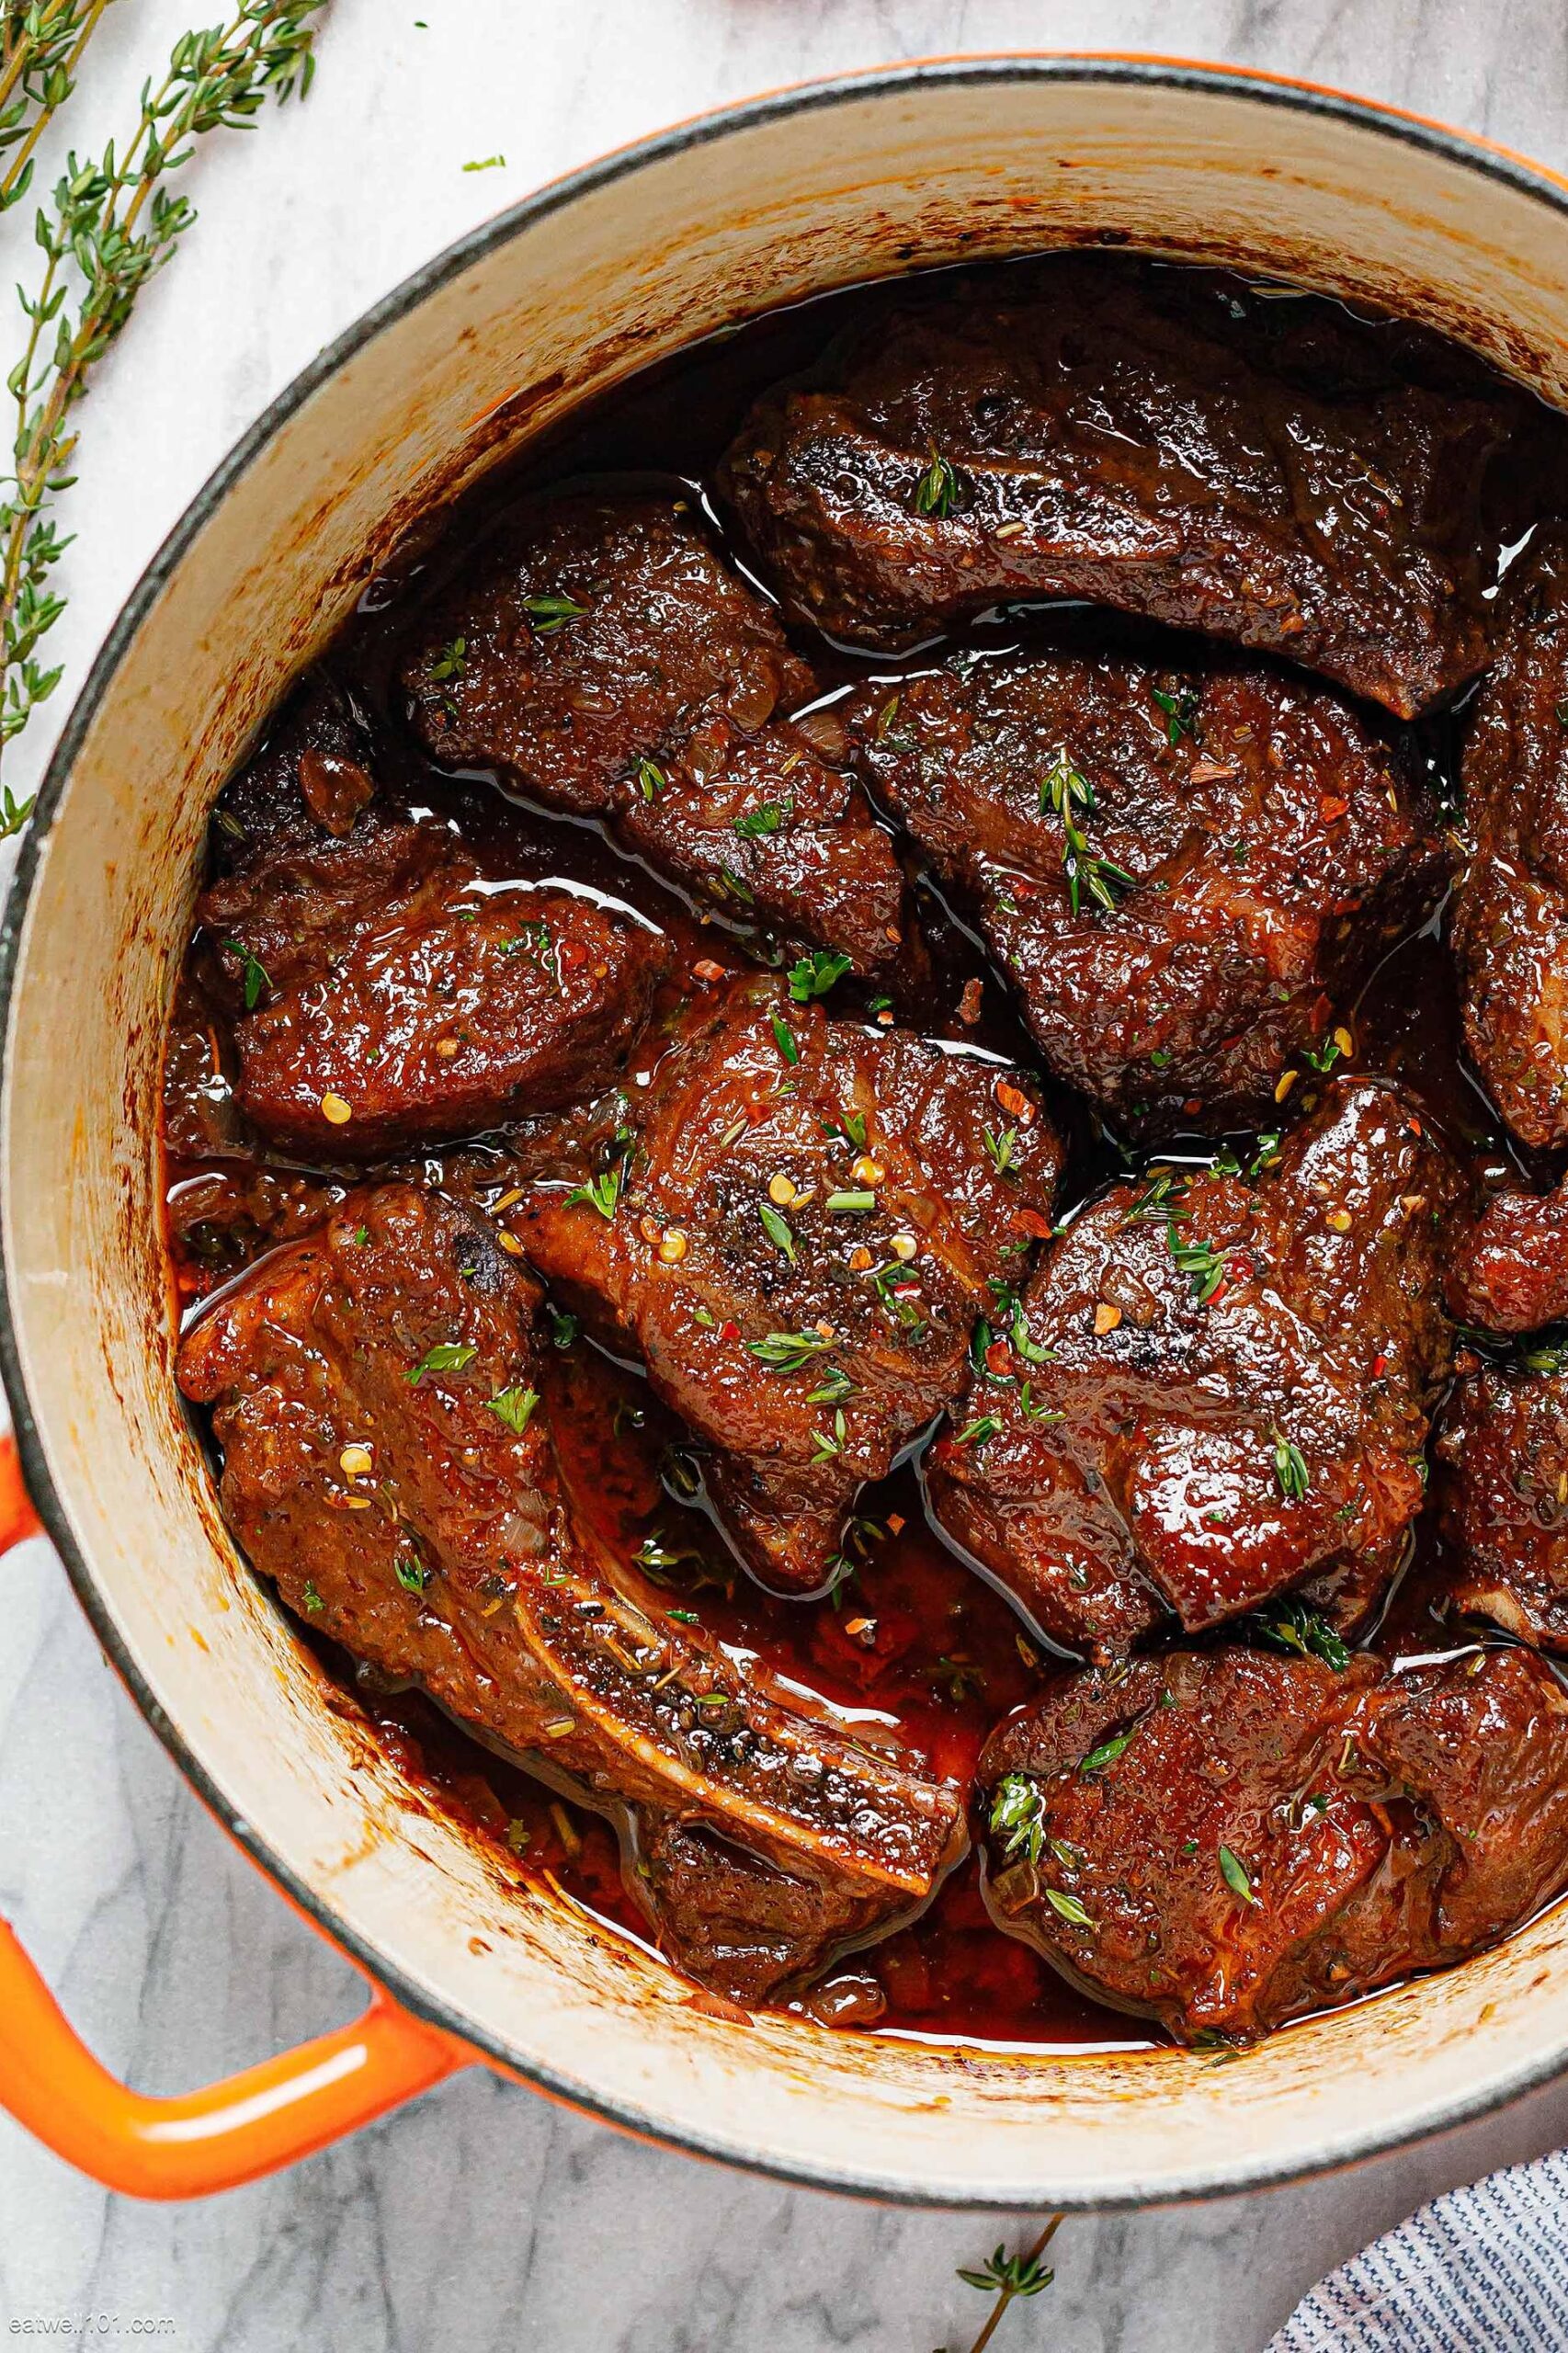  The juicy pork becomes infused with the flavors of thyme and bay leaf